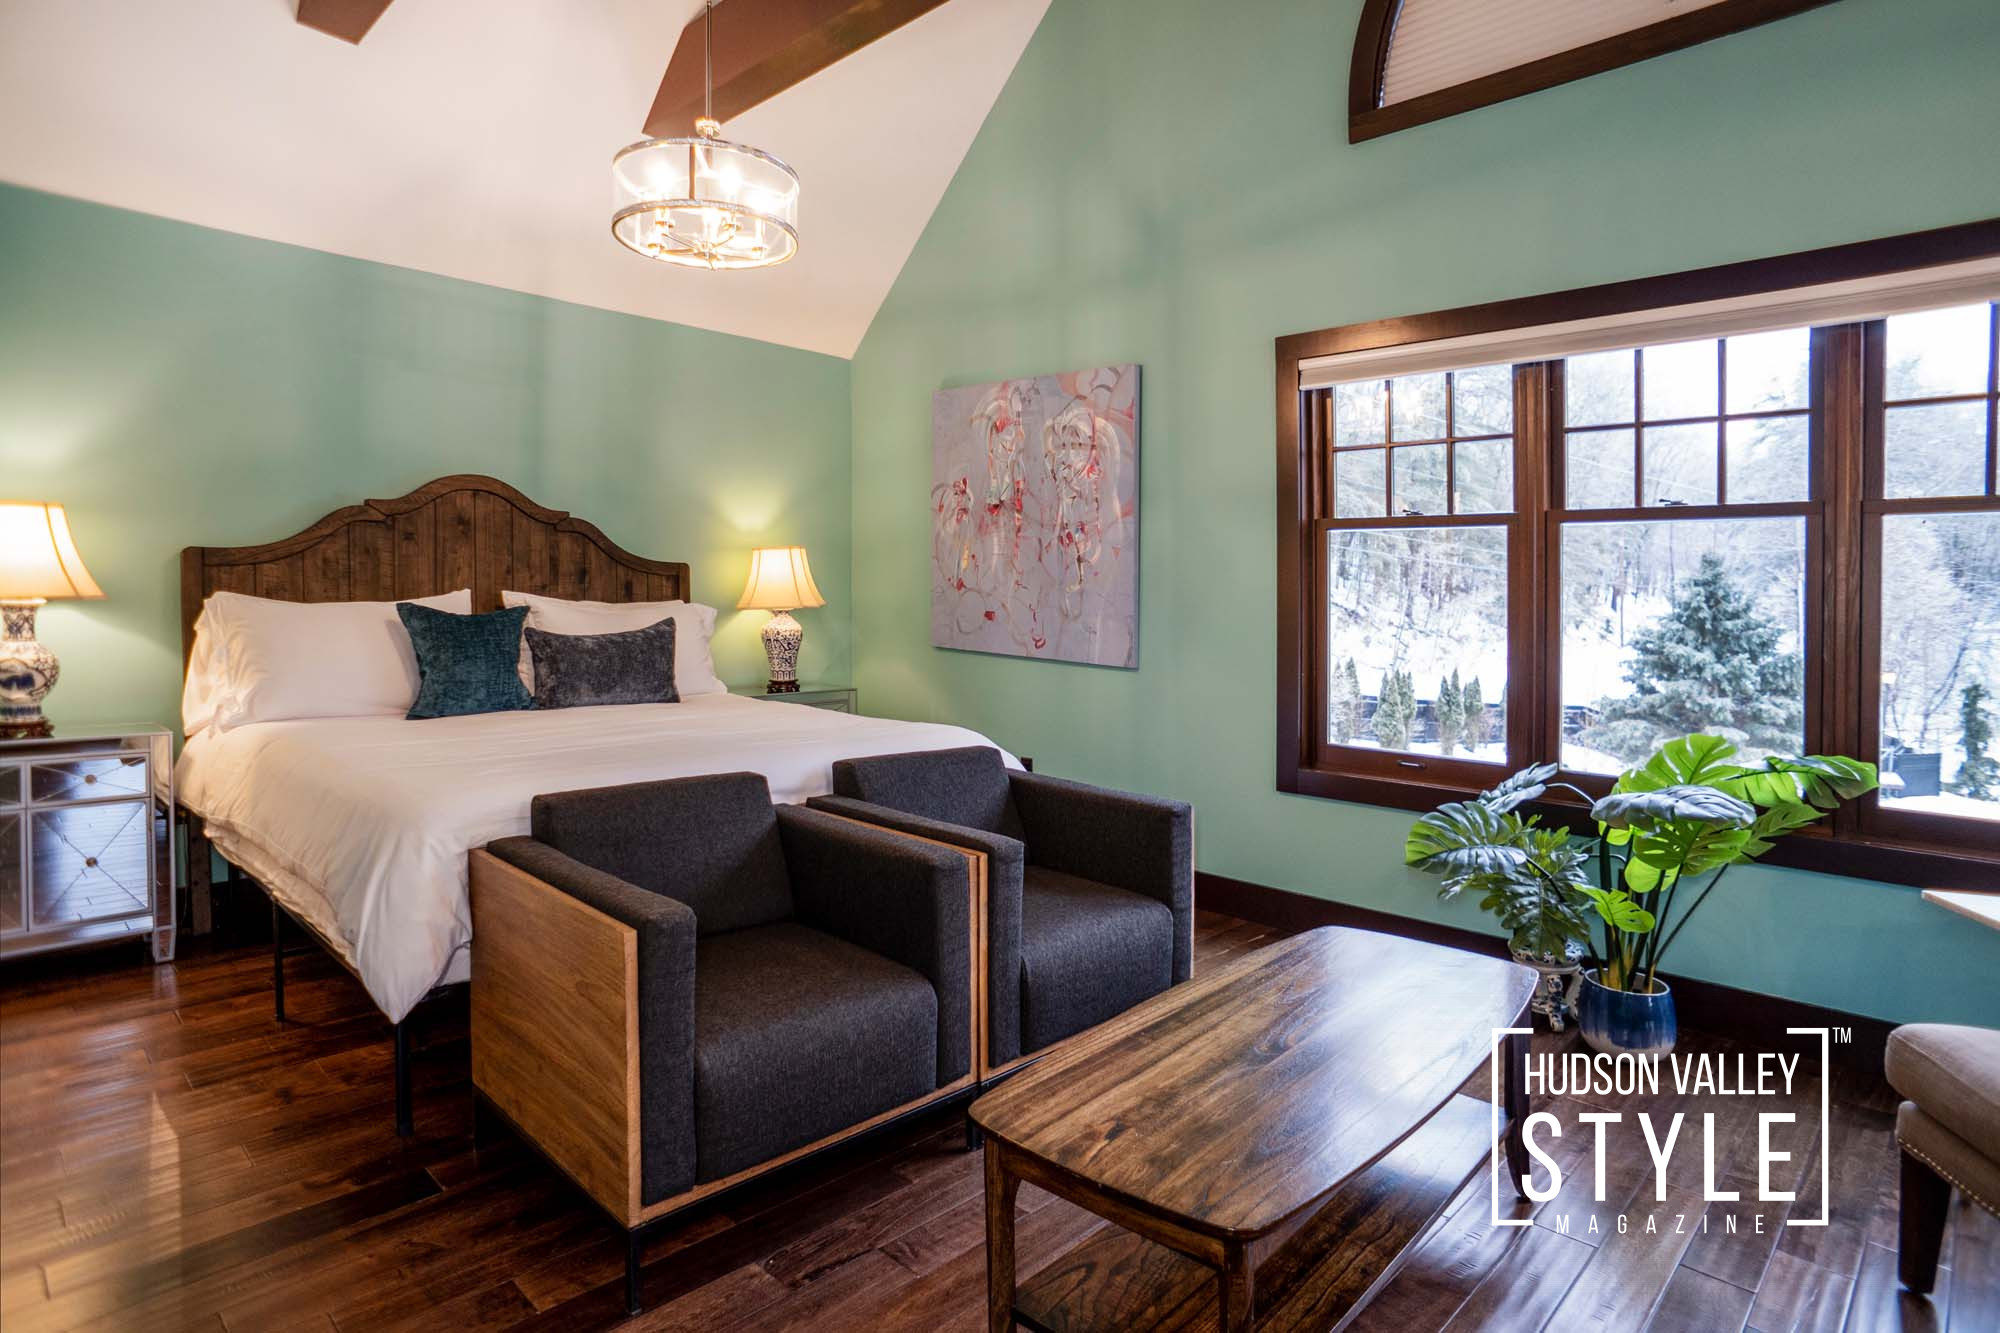 Hudson Valley Style Magazine Photo Gallery – Featured Hudson Valley Home for Sale in Catskill, NY – Real Estate Photography by Alluvion Real Estate